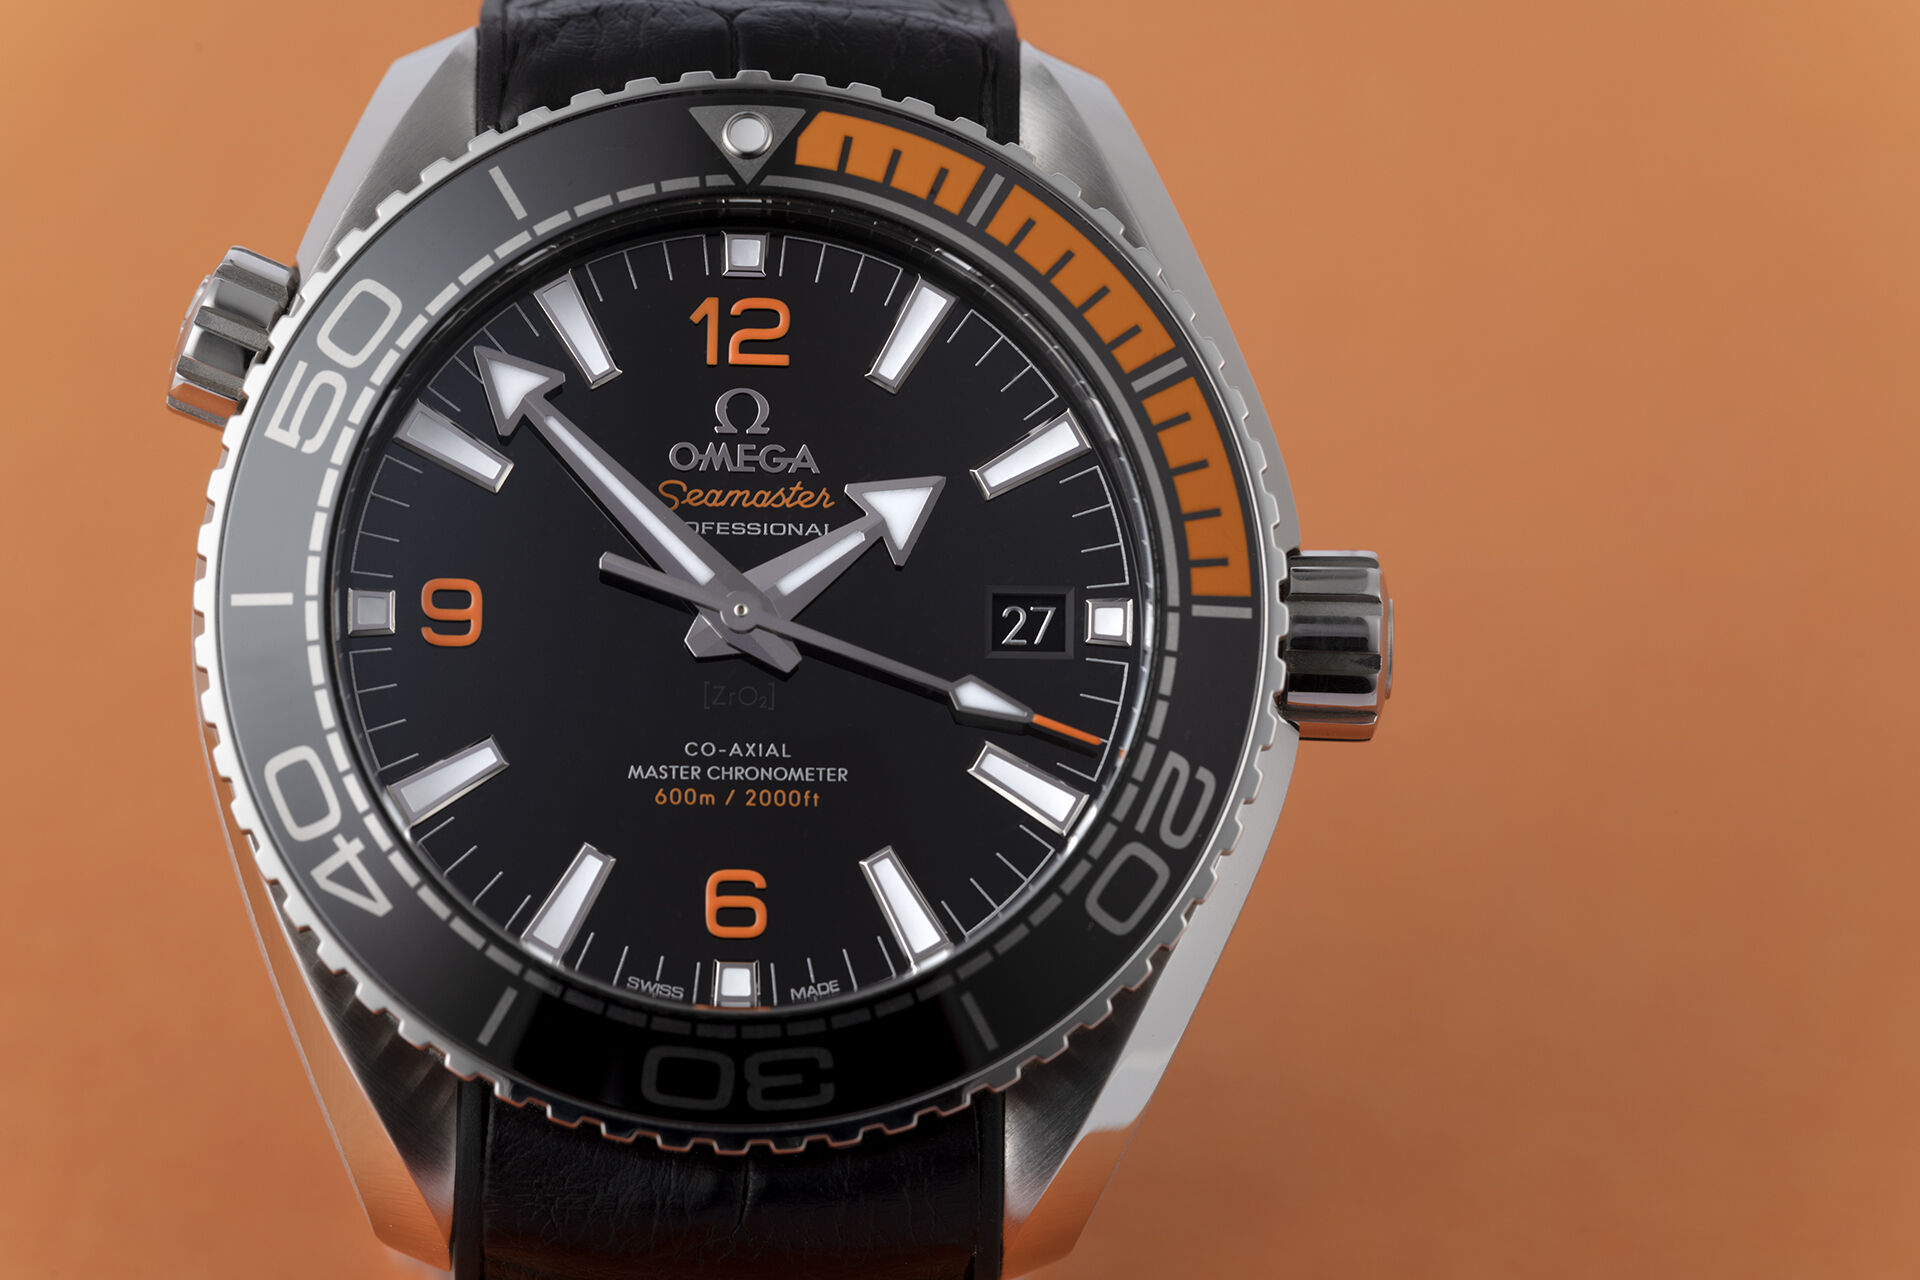 ref 215.32.44.21.01.001 | Co-Axial Master Chronometer | Omega Seamaster Planet Ocean 600M Co‑Axial Master Chronometer